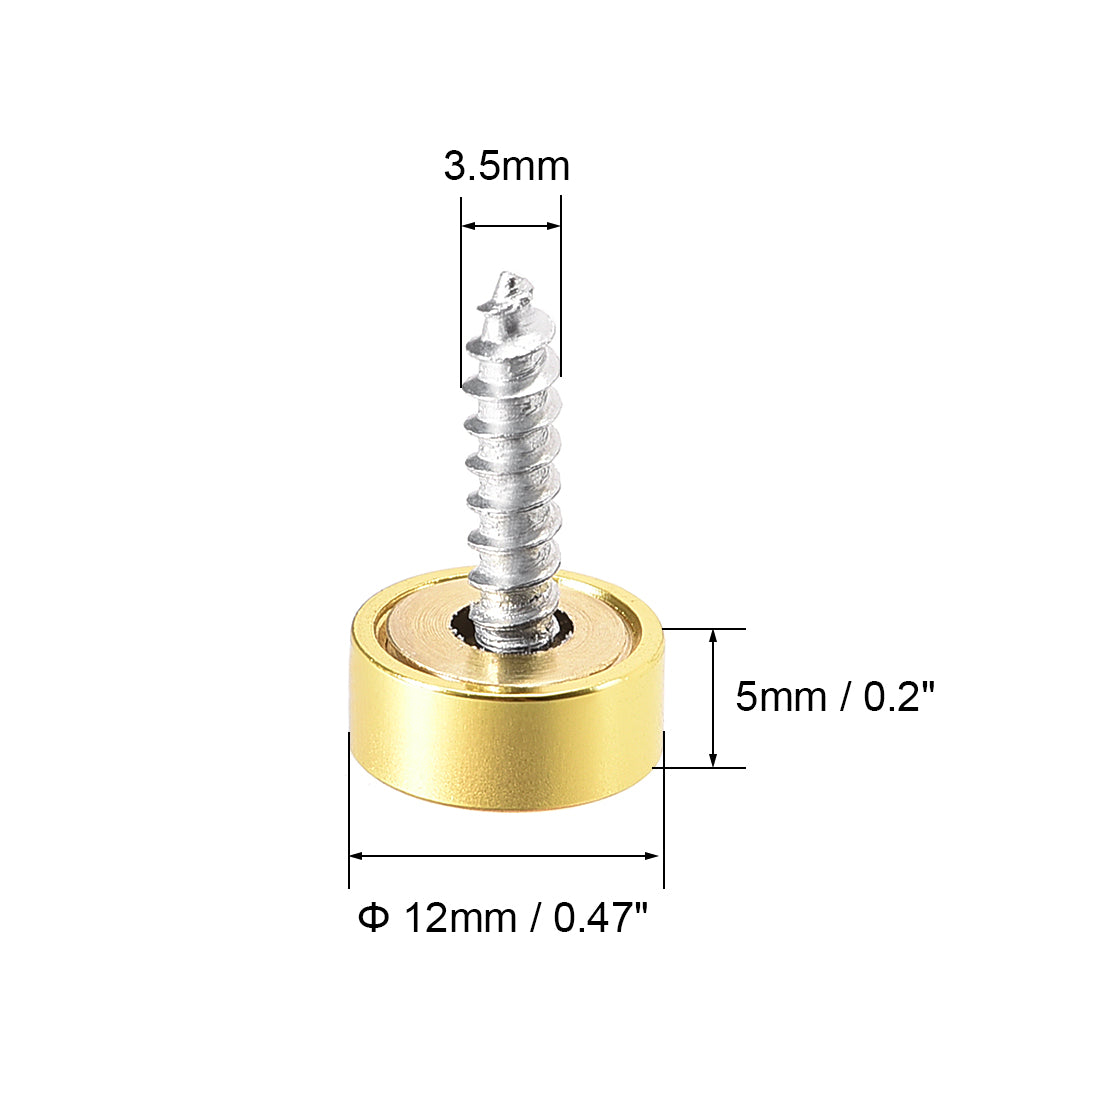 uxcell Uxcell Mirror Screws, Decorative Cap Fasteners Cover Nails, Electroplated, Bright Golden 12mm/0.47" Brass 4pcs